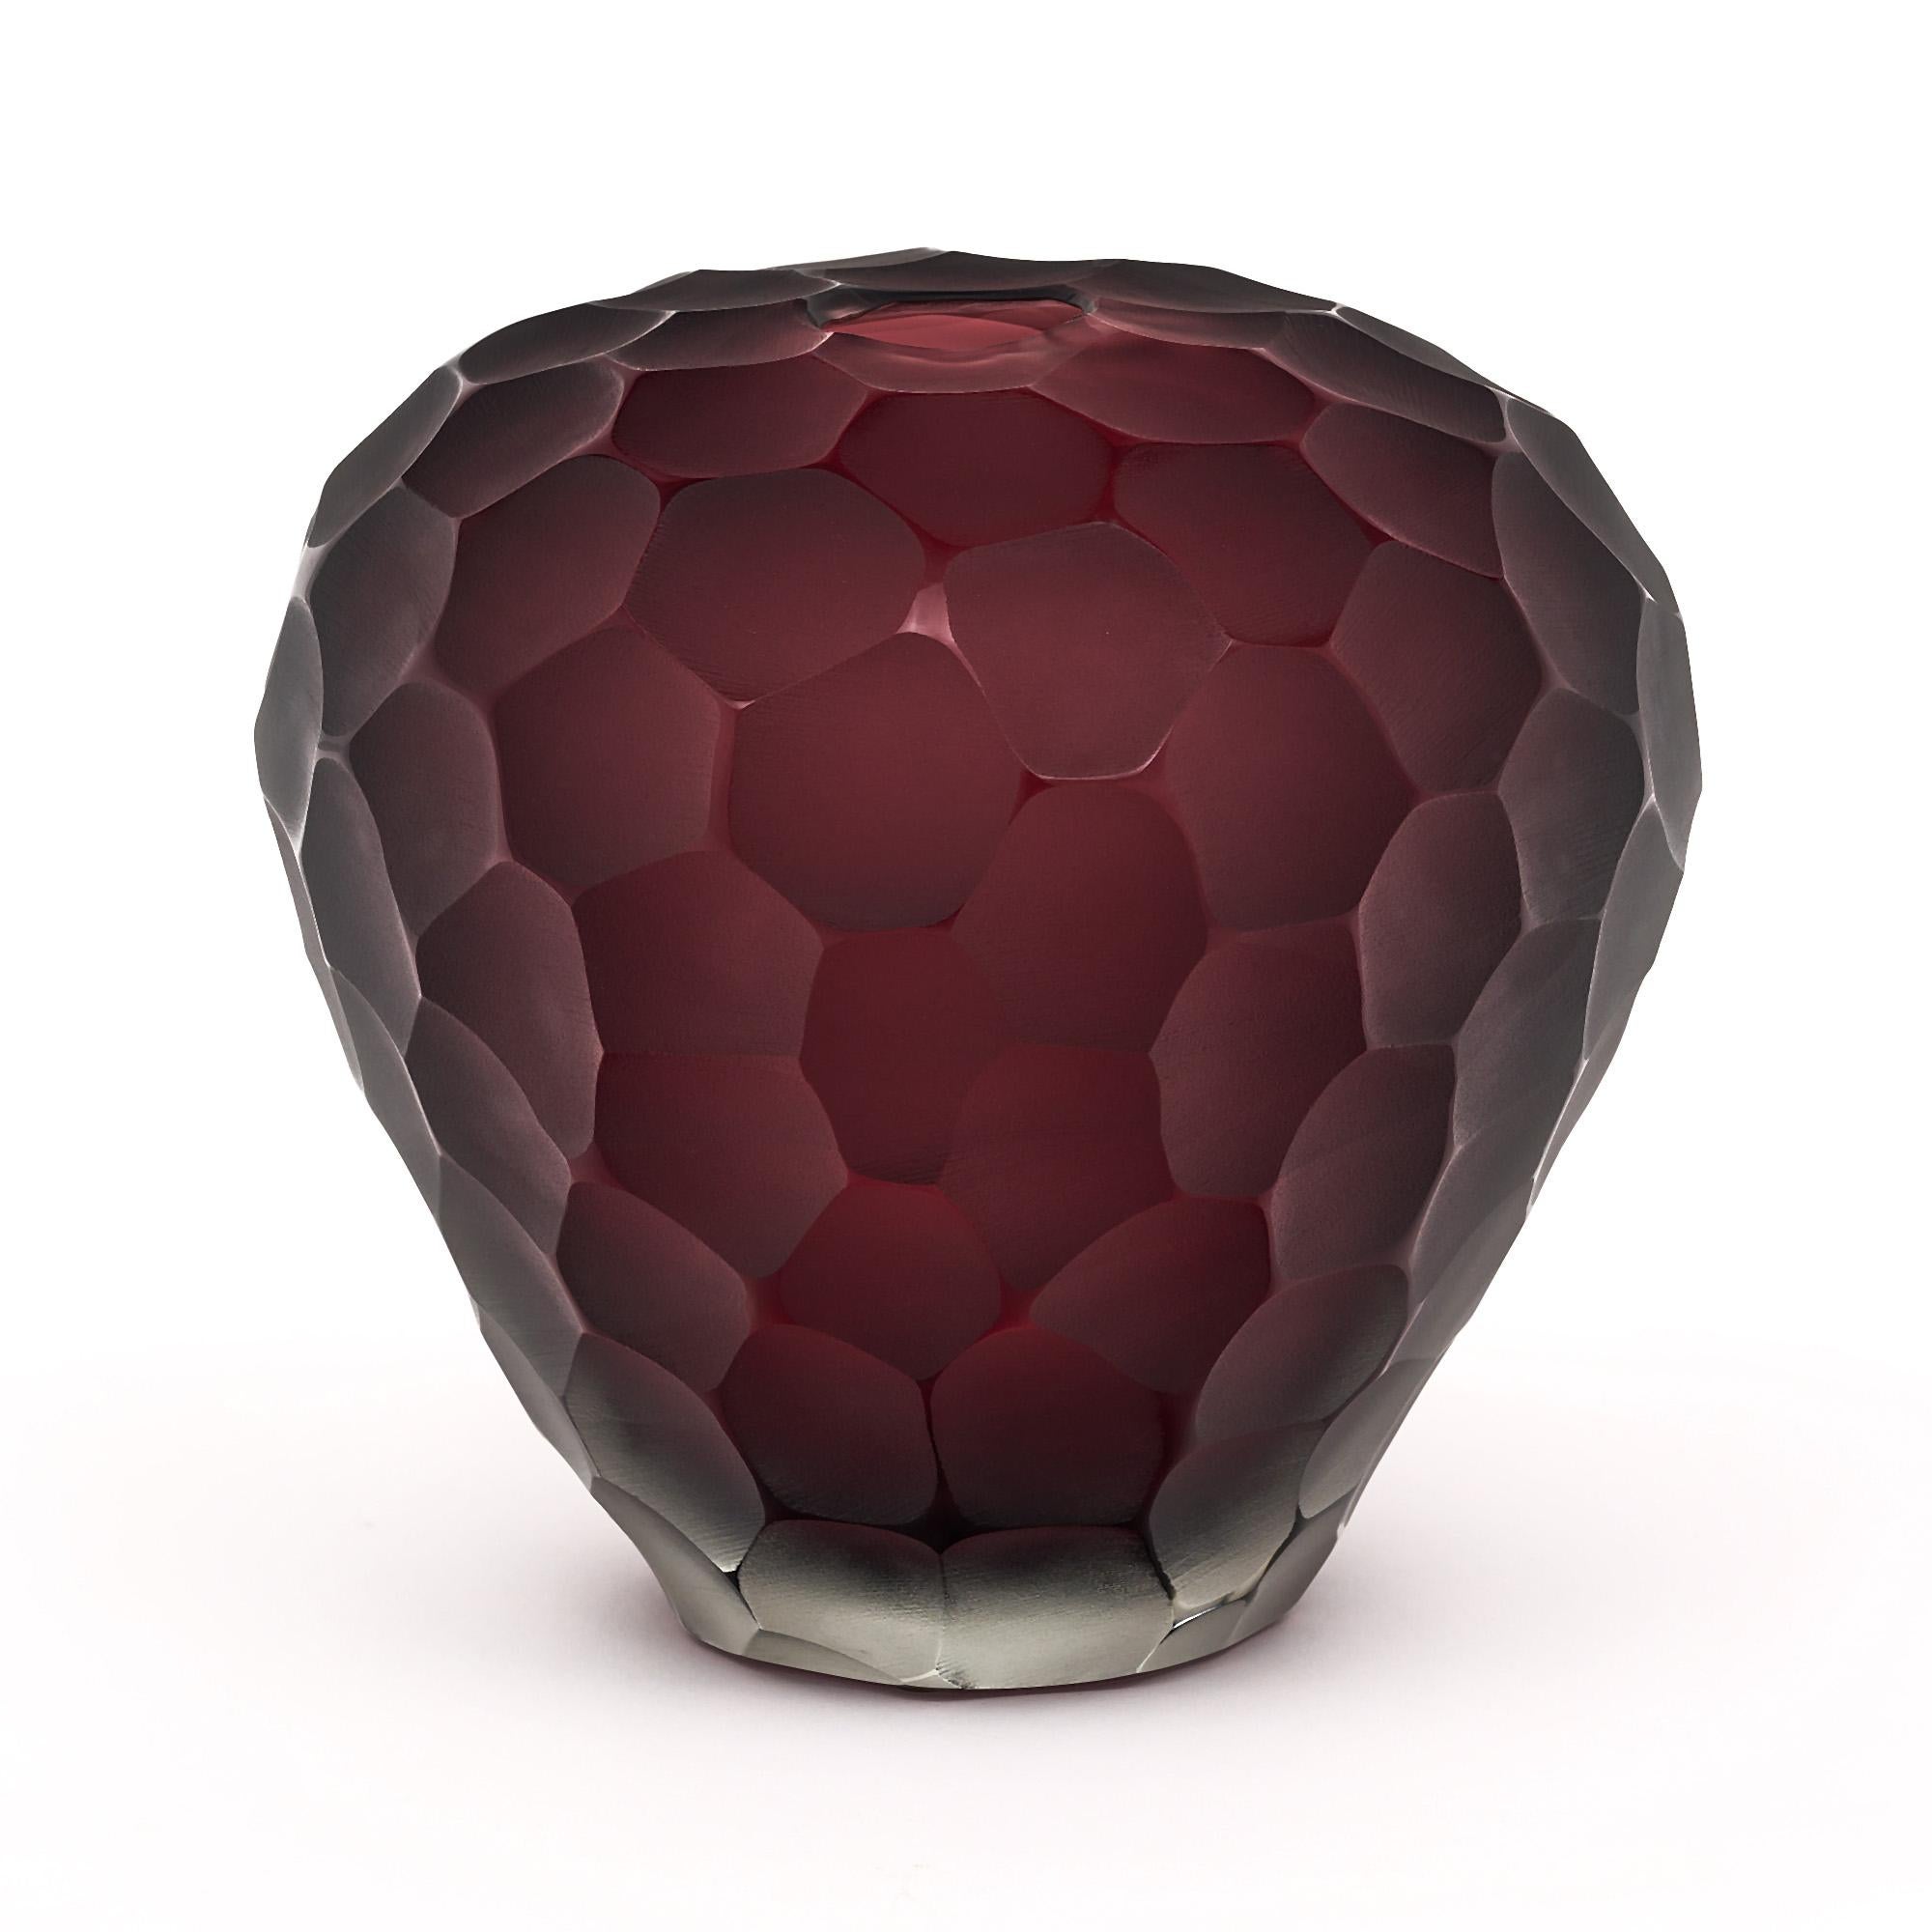 Vase, Italian, from the island of Murano. This hand-blown piece is made of warm burgundy colored glass in the hammered “battuto” style. In the manner of Ettoree Sottsass. Signed by glass maestro Alberto Dona.

This piece is in excellent condition